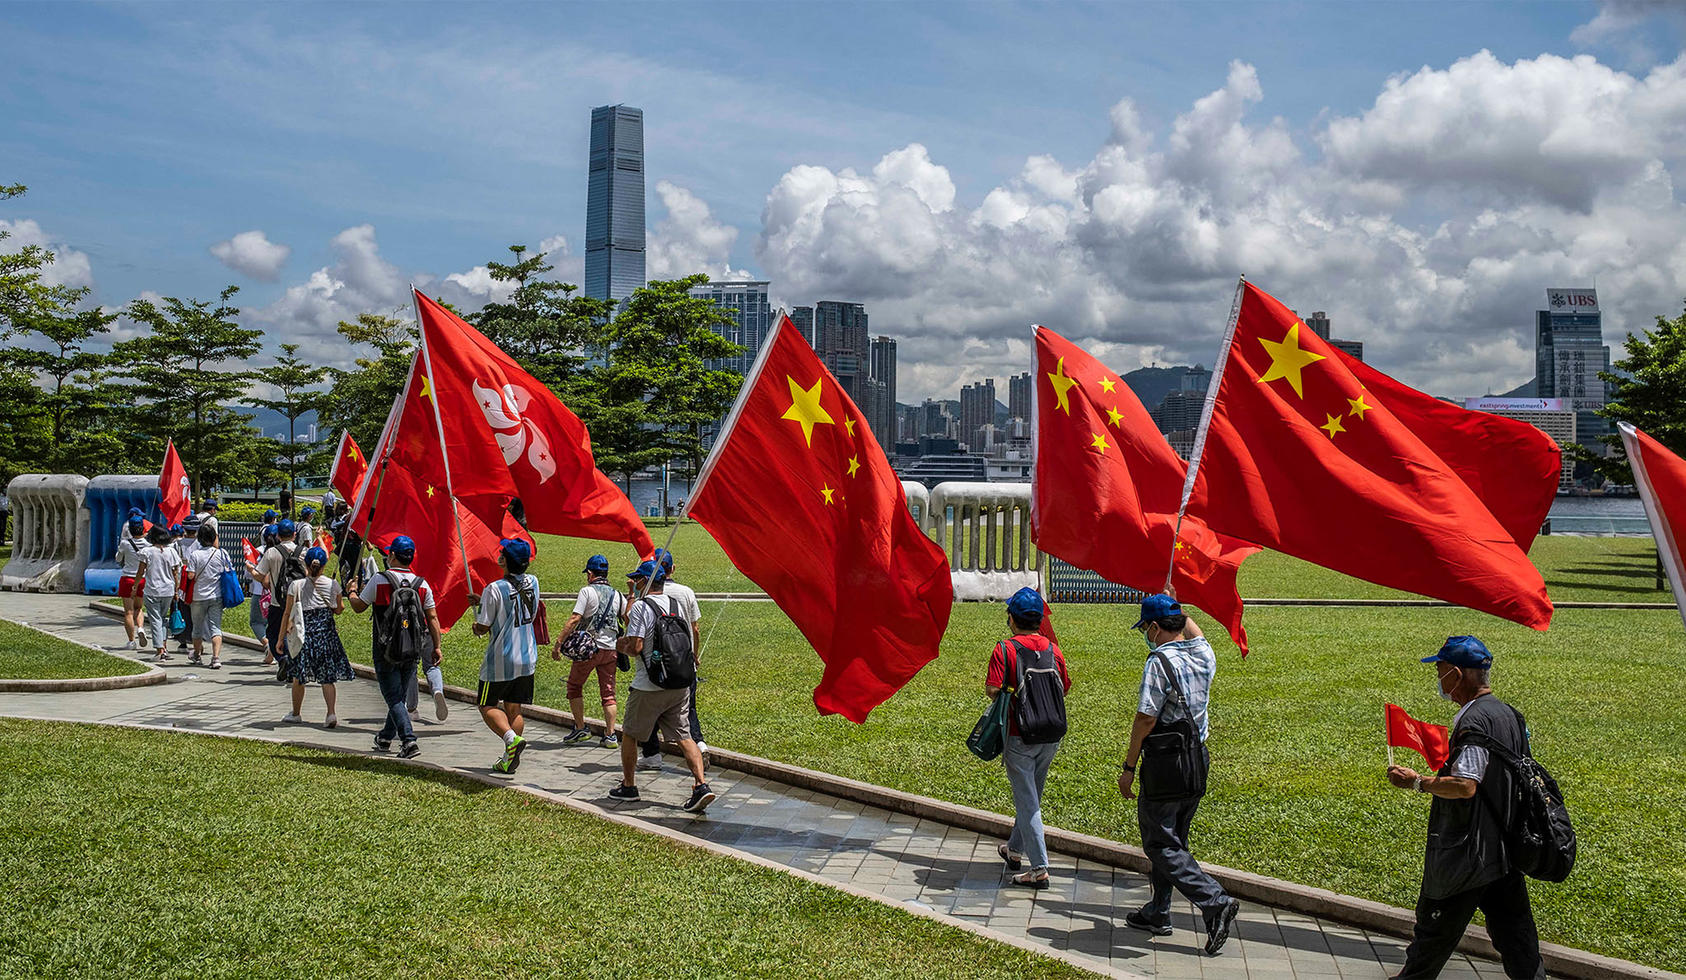 Supporters of the government in Beijing, carrying the flag of China, march in Hong Kong after new national security law goes into effect. June 30, 2020. (Lam Yik Fei/The New York Times)